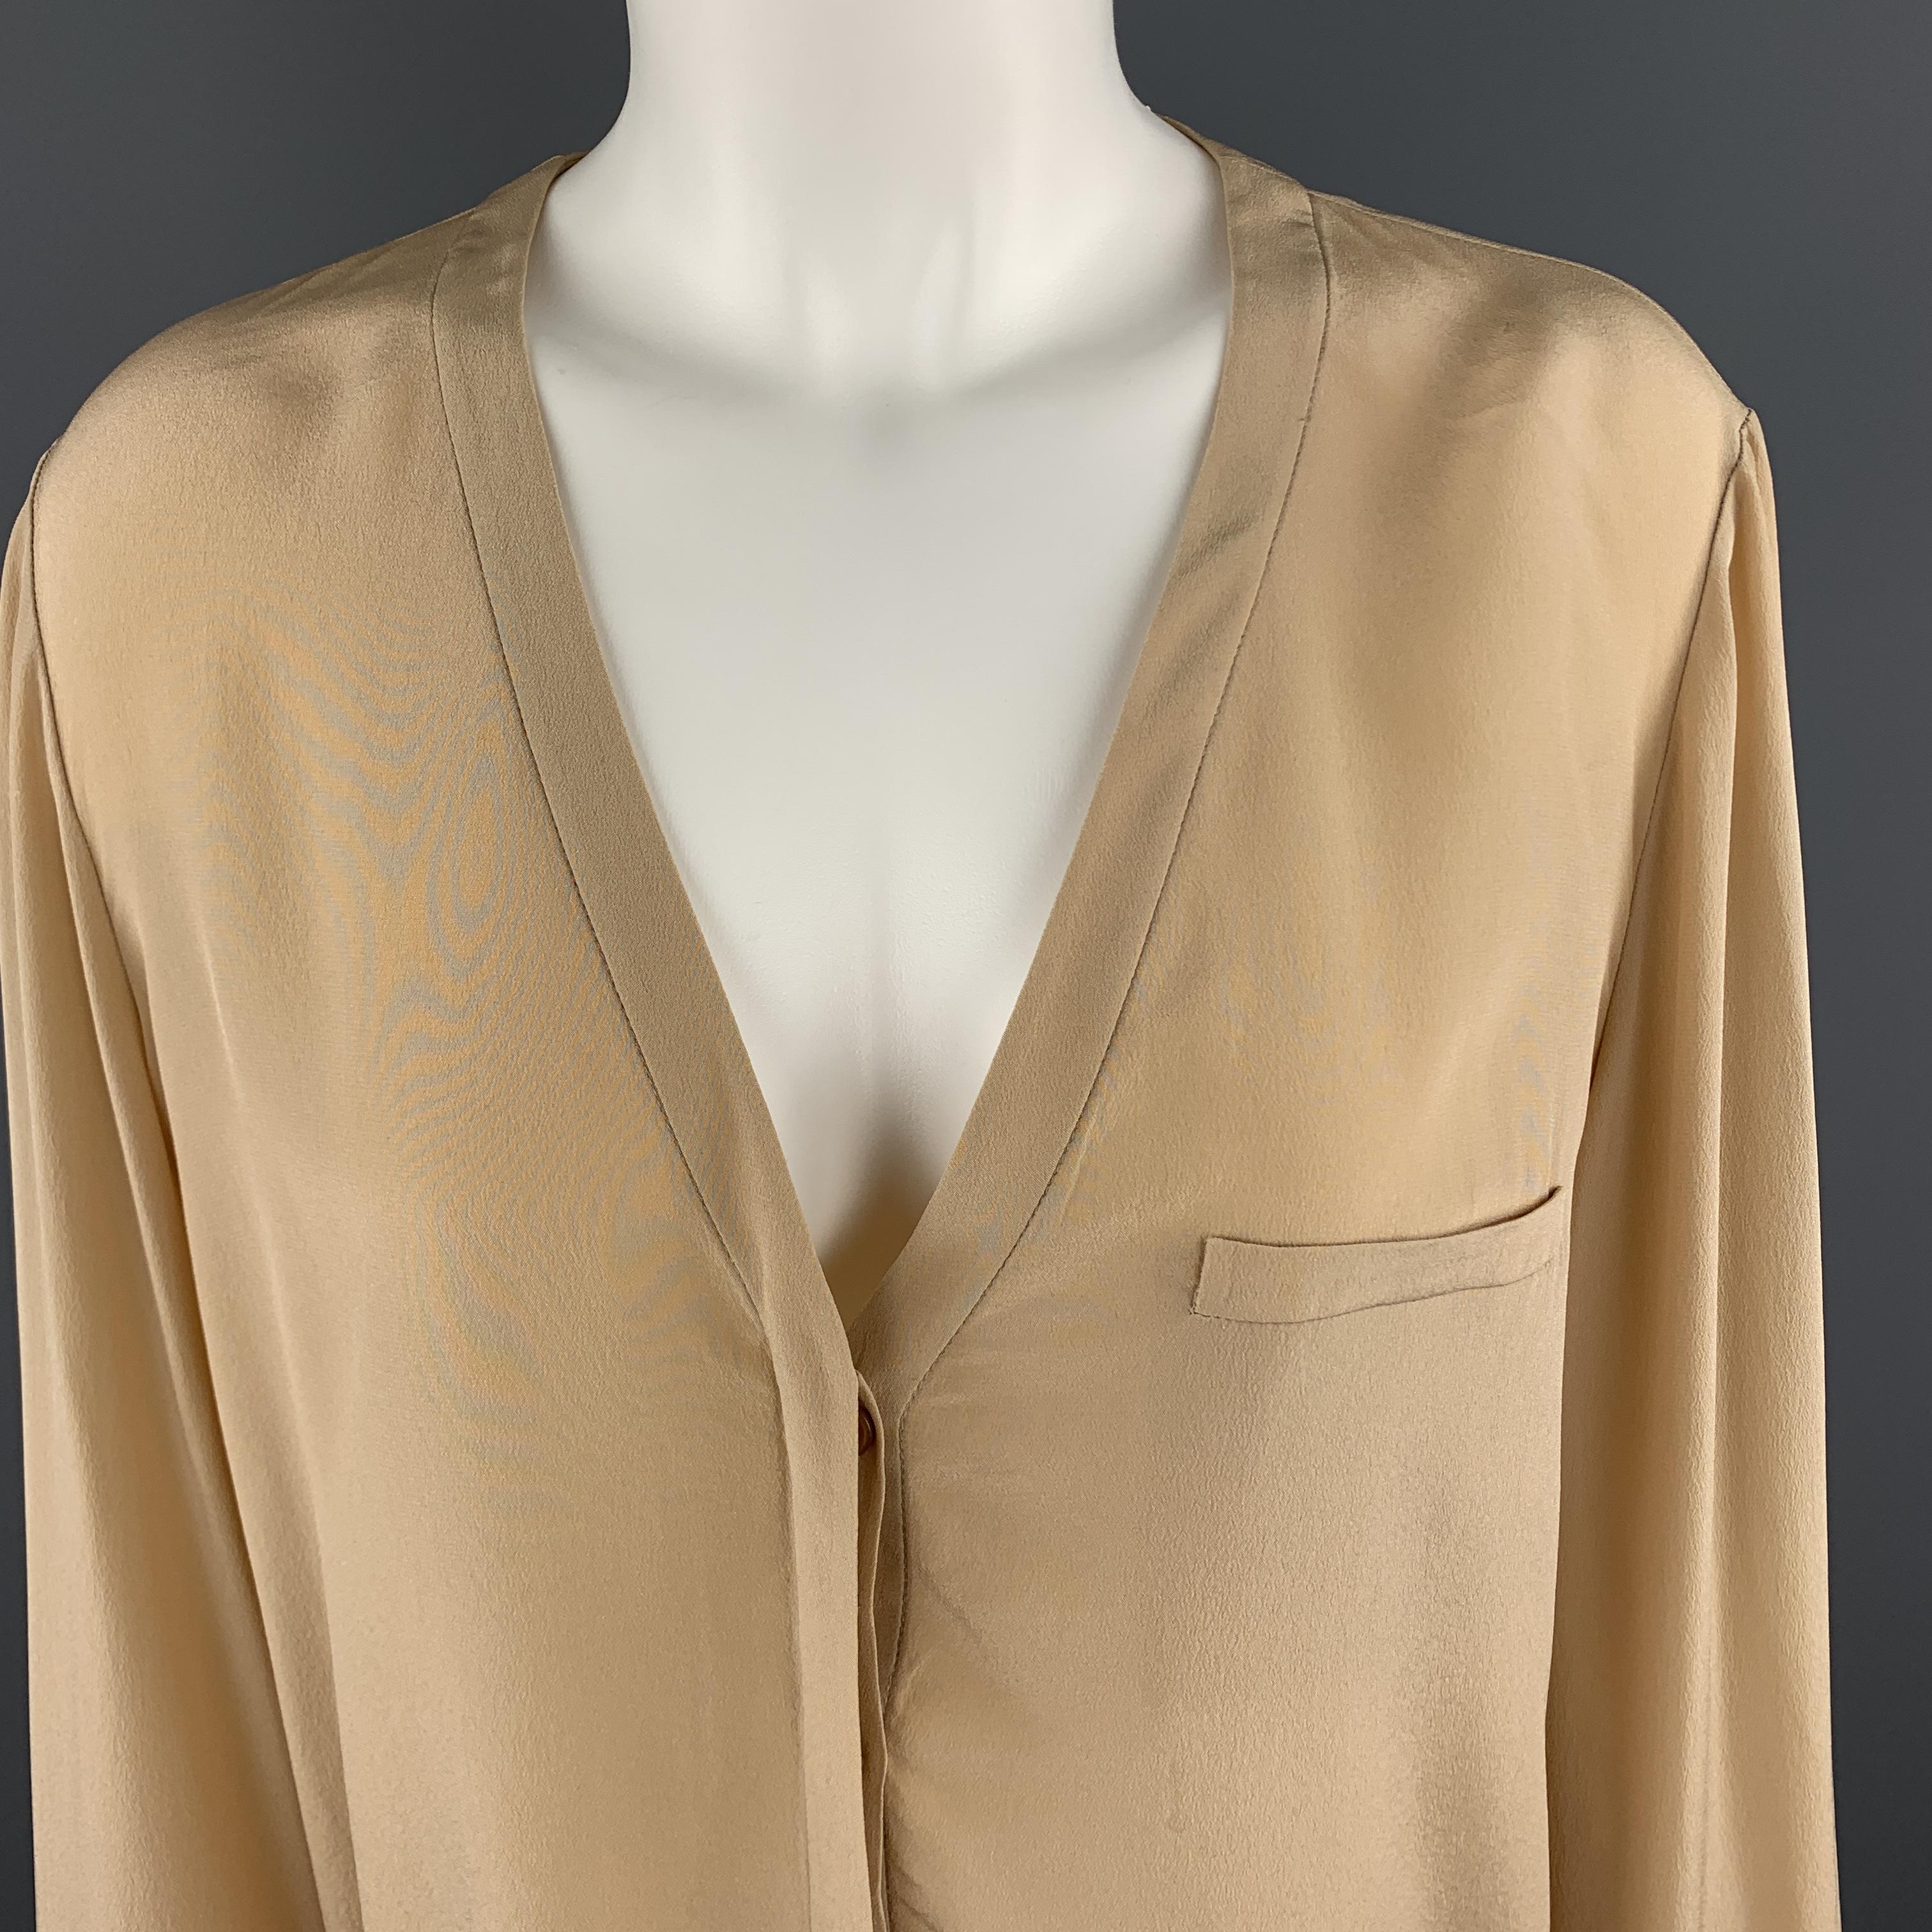 CHLOE silk crepe blouse features a deep V neckline, hidden placket button up front, and long sleeves with bow detailed cuffs. 

Very Good Pre-Owned Condition.
Marked: EU 44

Measurements:

Shoulder: 19 in.
Bust: 40 in.
Sleeve: 25 in.
Length: 25 in.